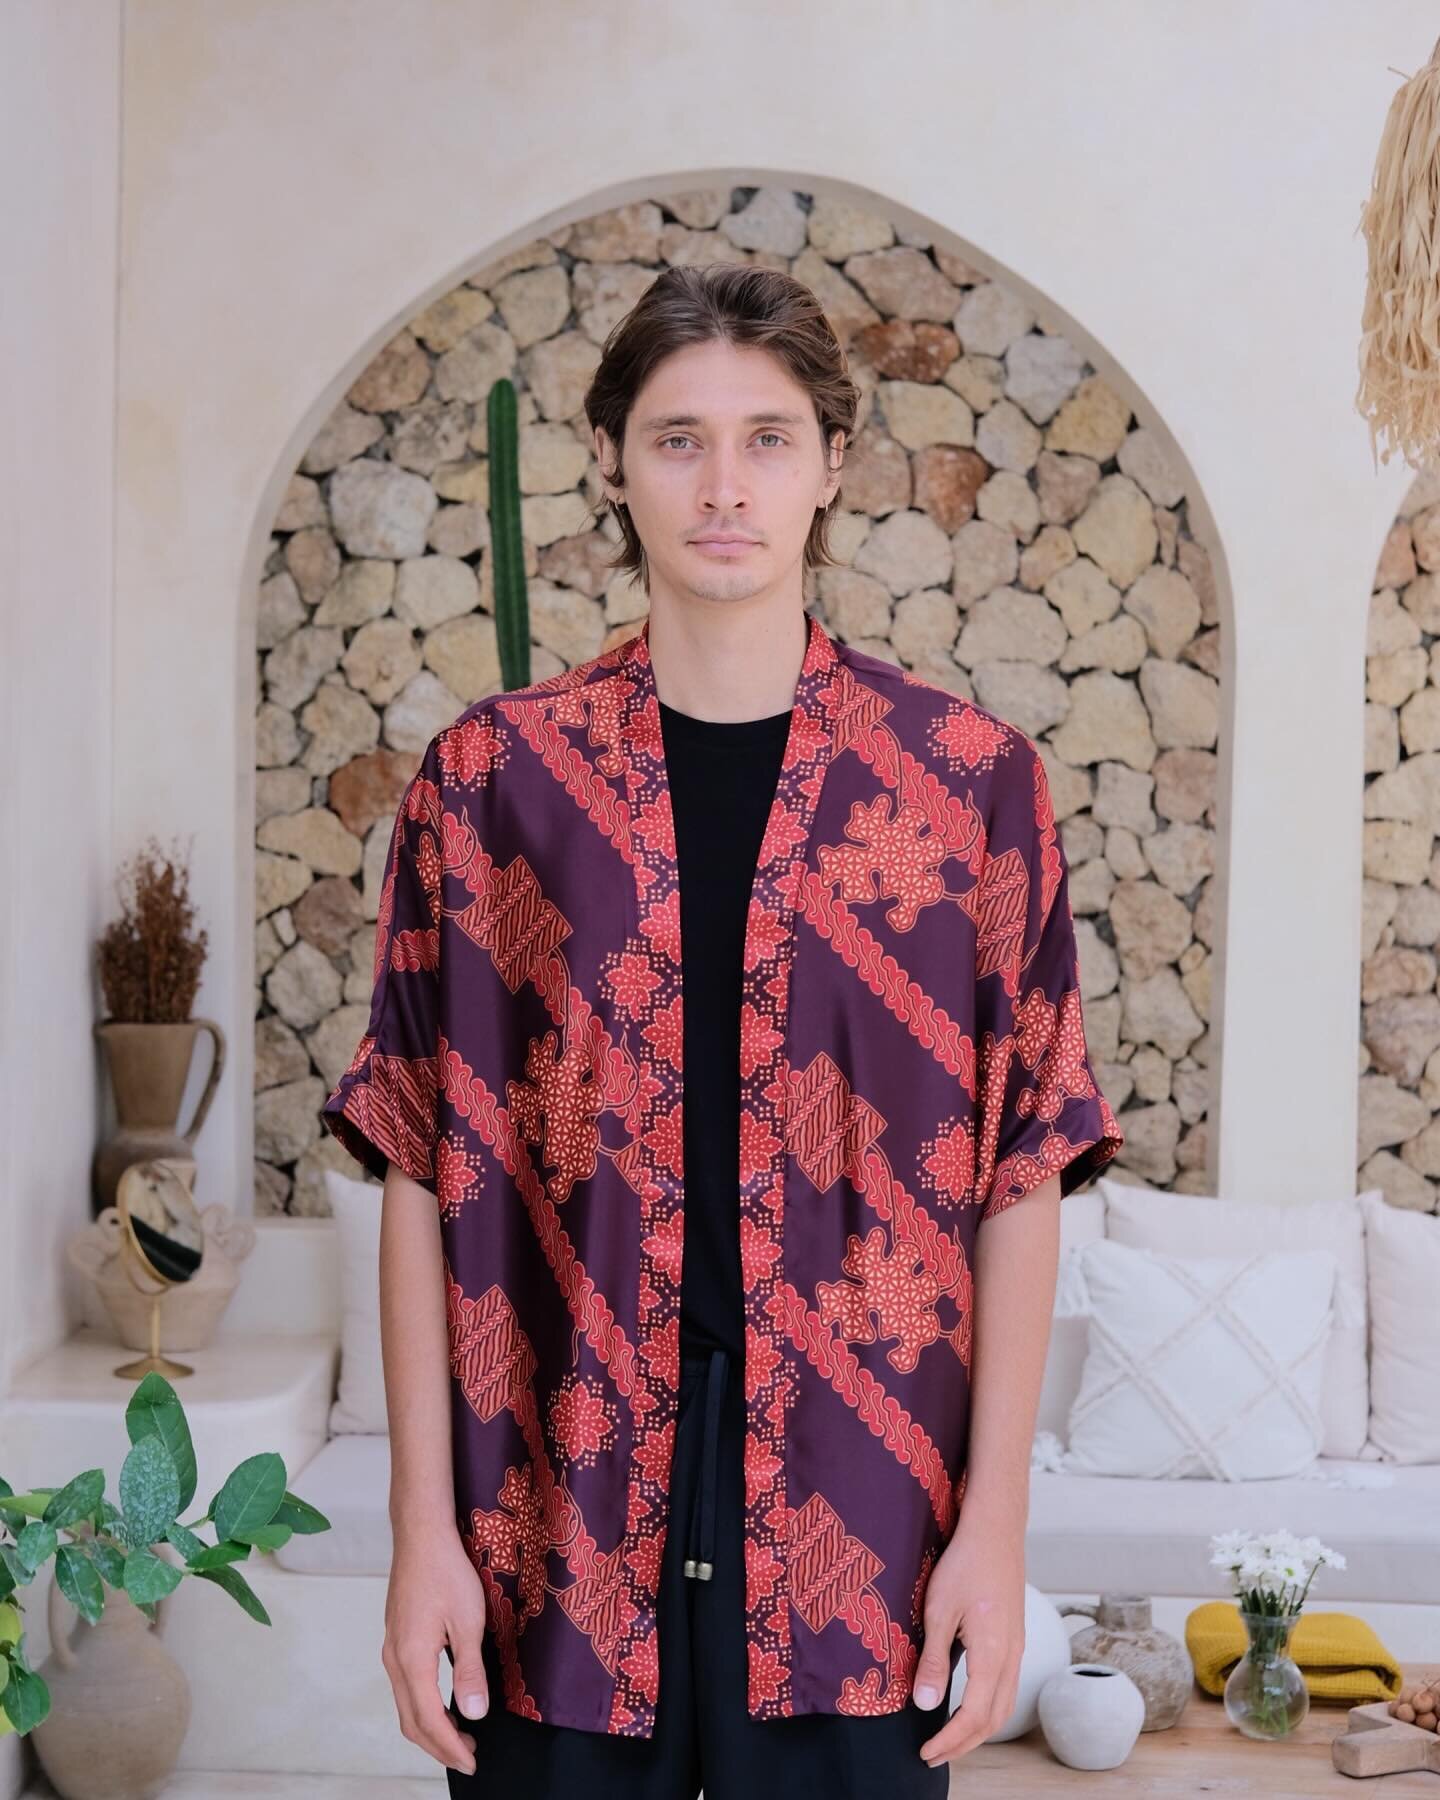 🌞 Elevate your summer style with our new Oasi Kimono Shirt! 🌺 

Unisex and vibrant, it&rsquo;s the perfect blend of artistry and comfort in a bold red print. Make a statement that reflects confidence and individuality. 

Available with matching sho